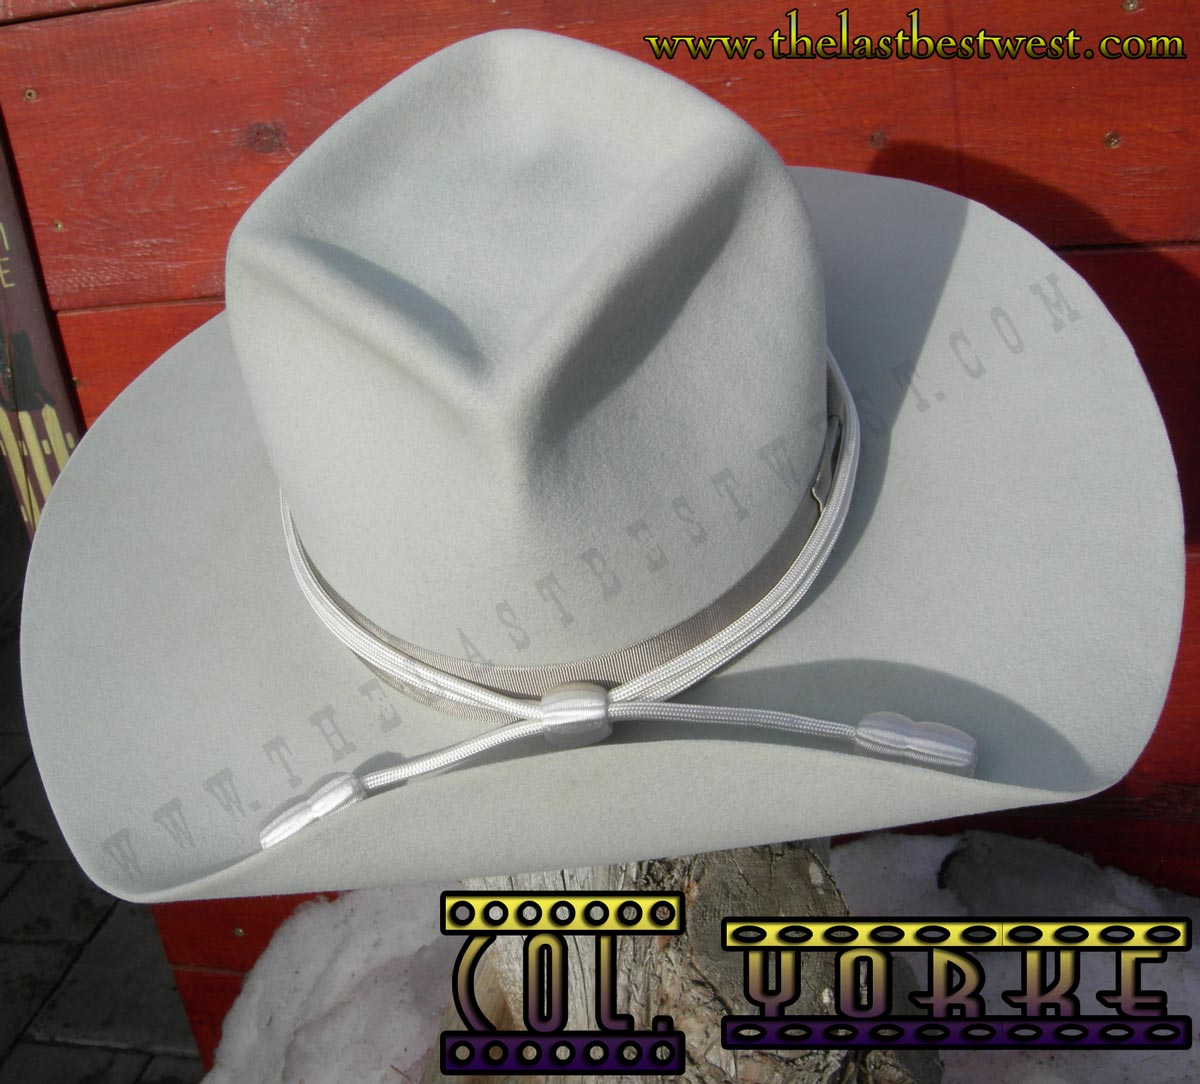 Col. Yorke Old West Cavalry Hat